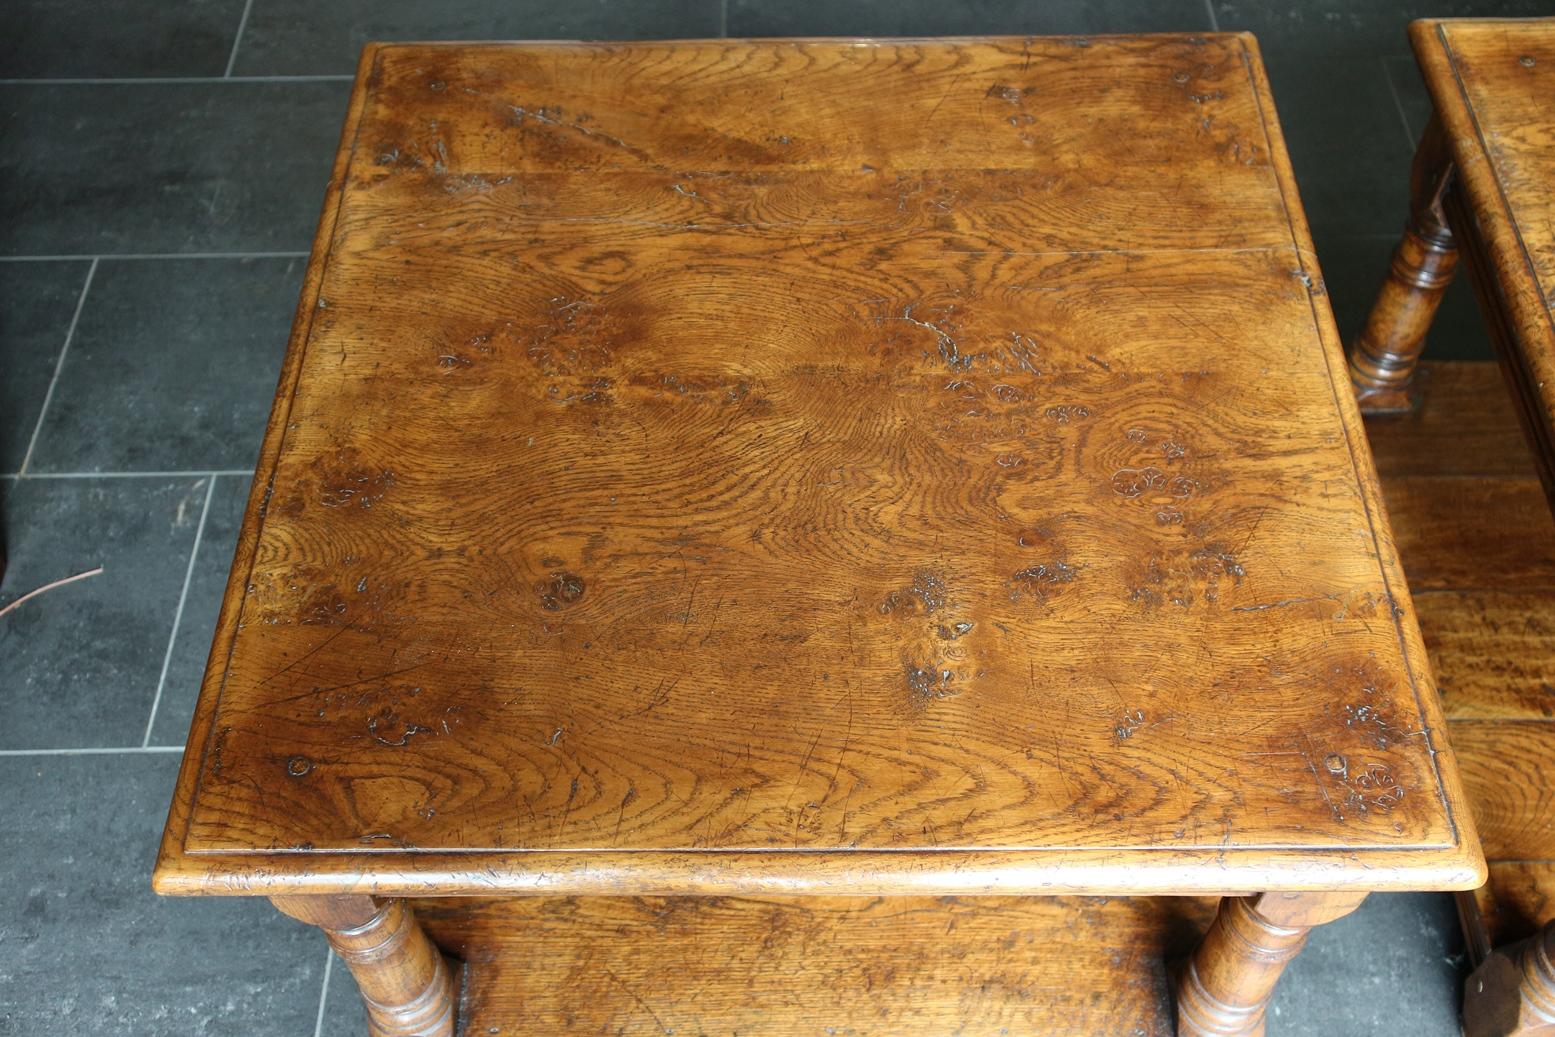 Set of square oak side tables with bottom shelf in very good condition. Warm color and beautiful oak. (pollard oak)
Together as a coffee table or as tables next to a couch.
Origin: England, 20th century
Size: 49cm x 49cm x H 46cm.
 